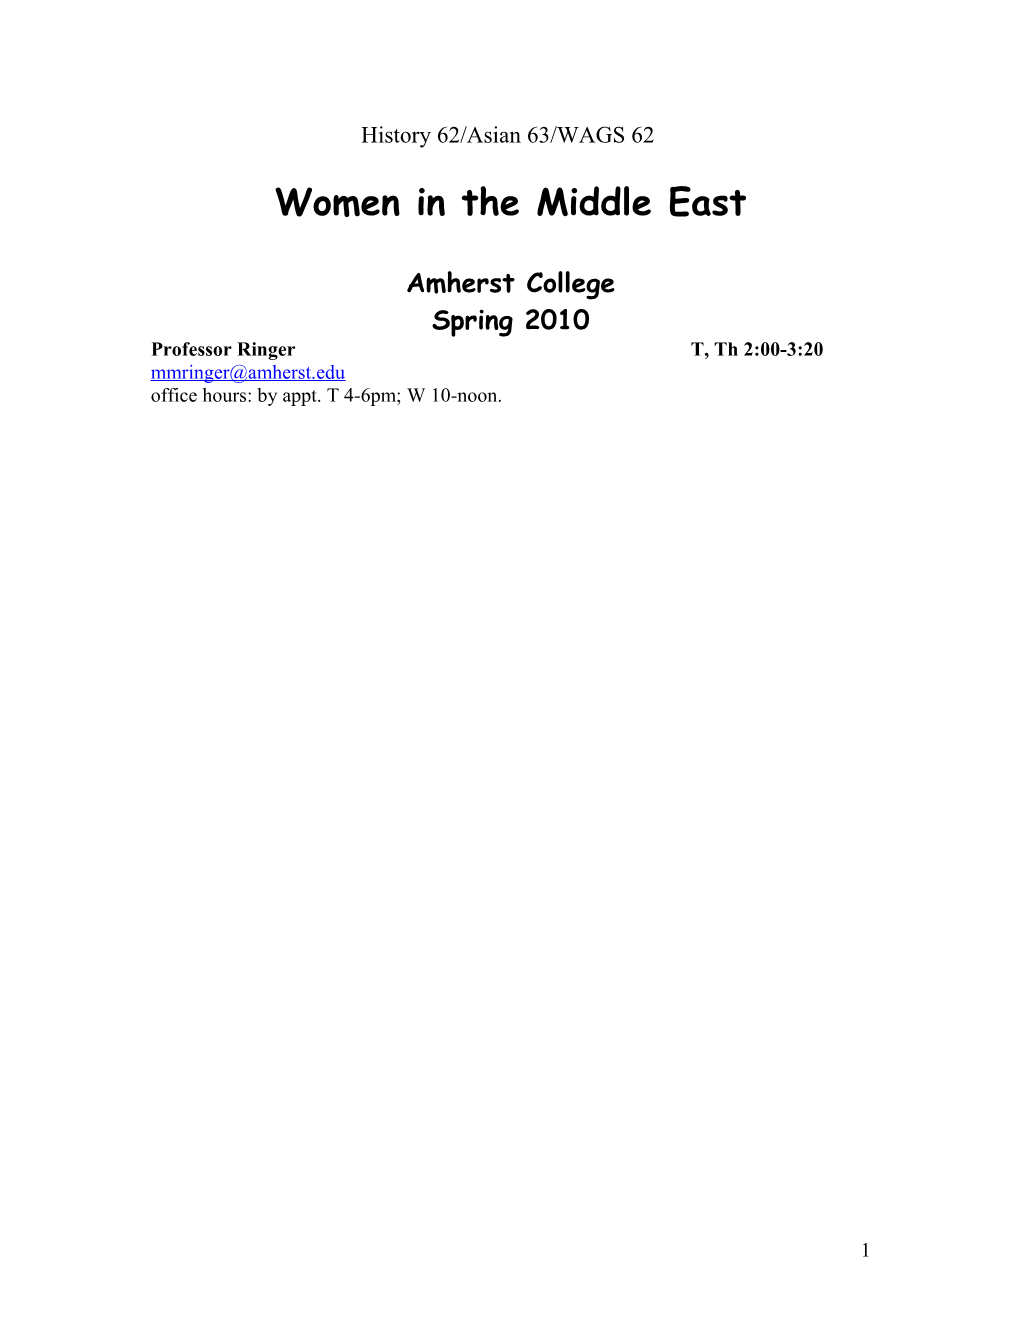 History 62/Asian 63/WAGS 62 Women in the Middle East